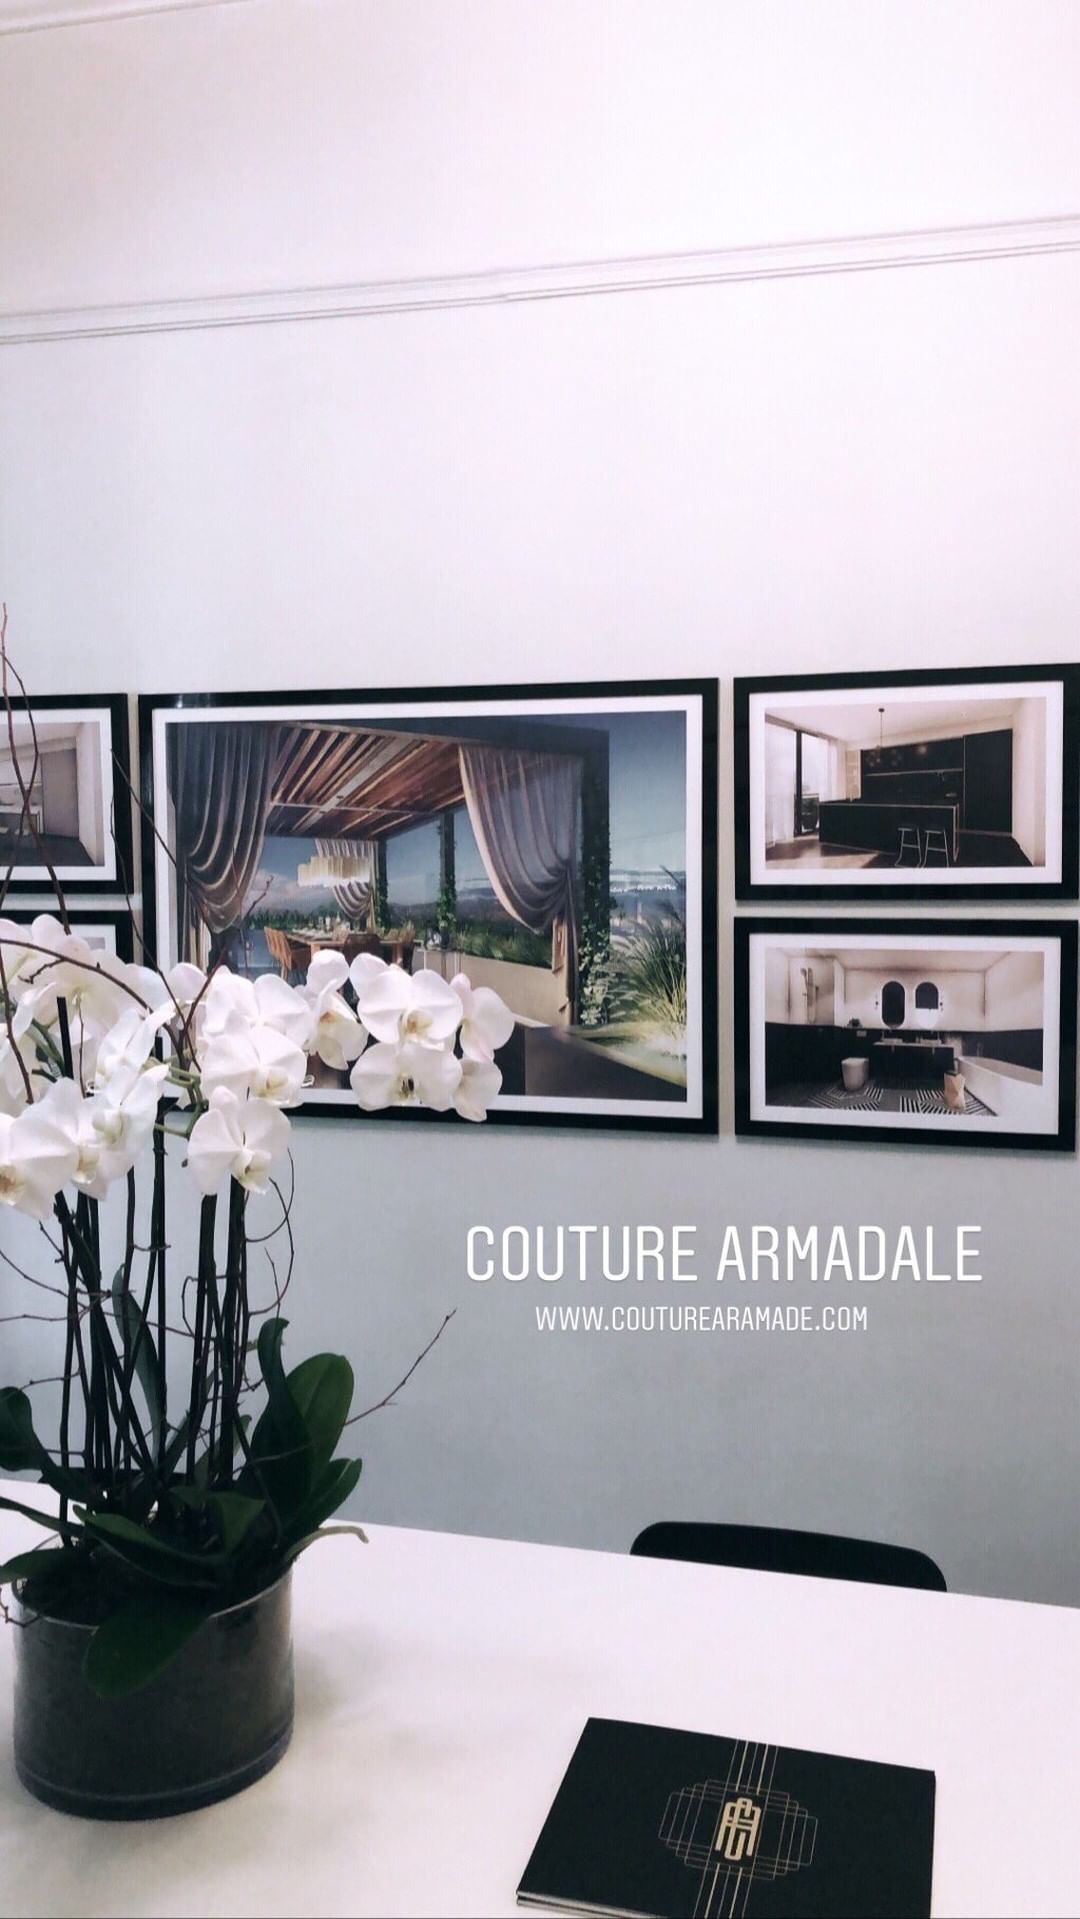 Couture Armadale launches. Display now open!